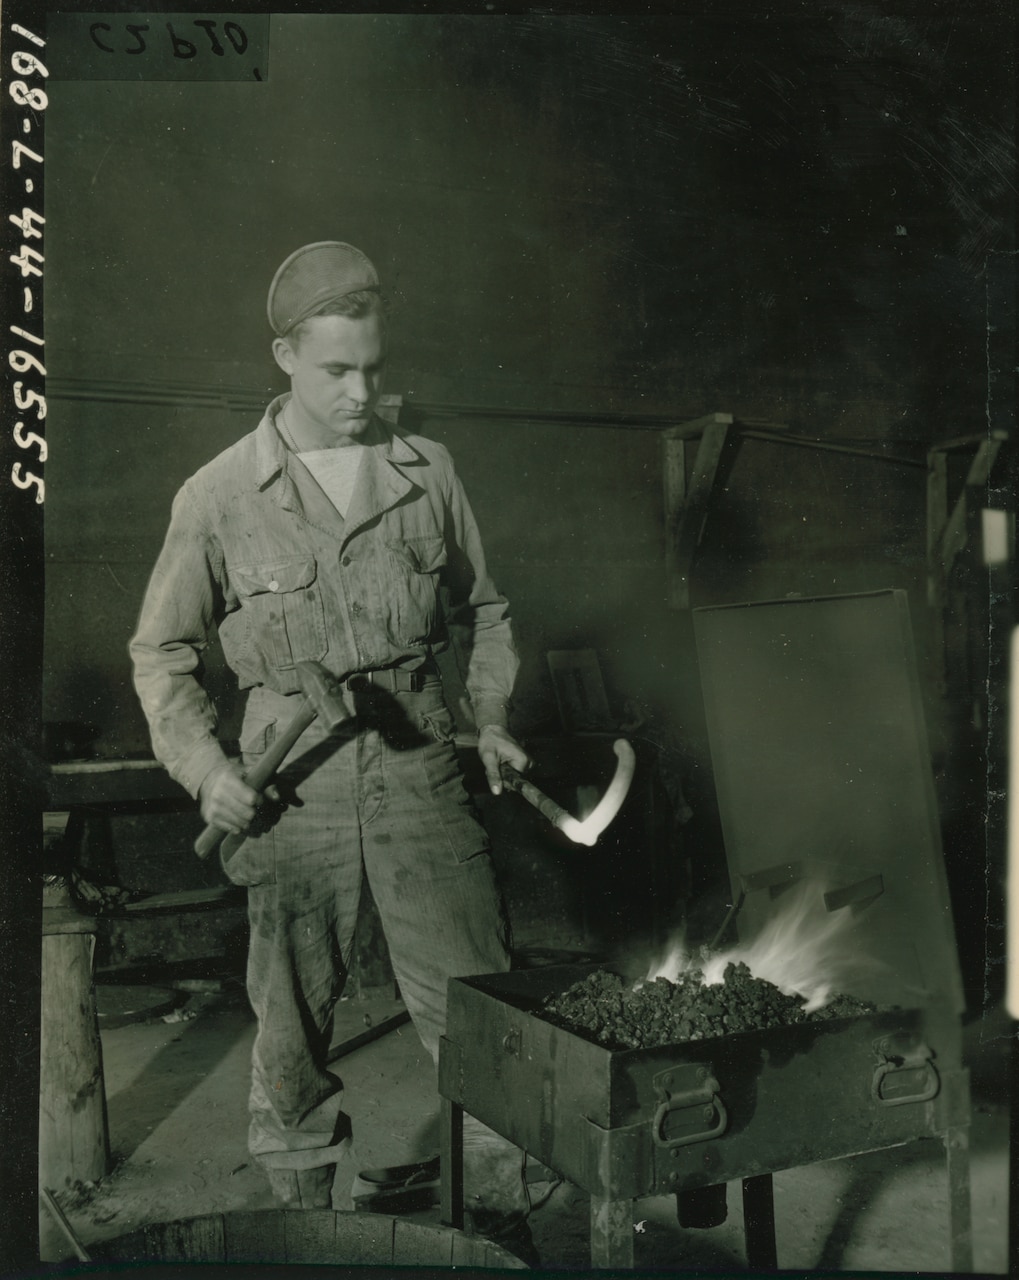 A soldier with a hammer in one hand holds a glowing hot metal bar over coals.